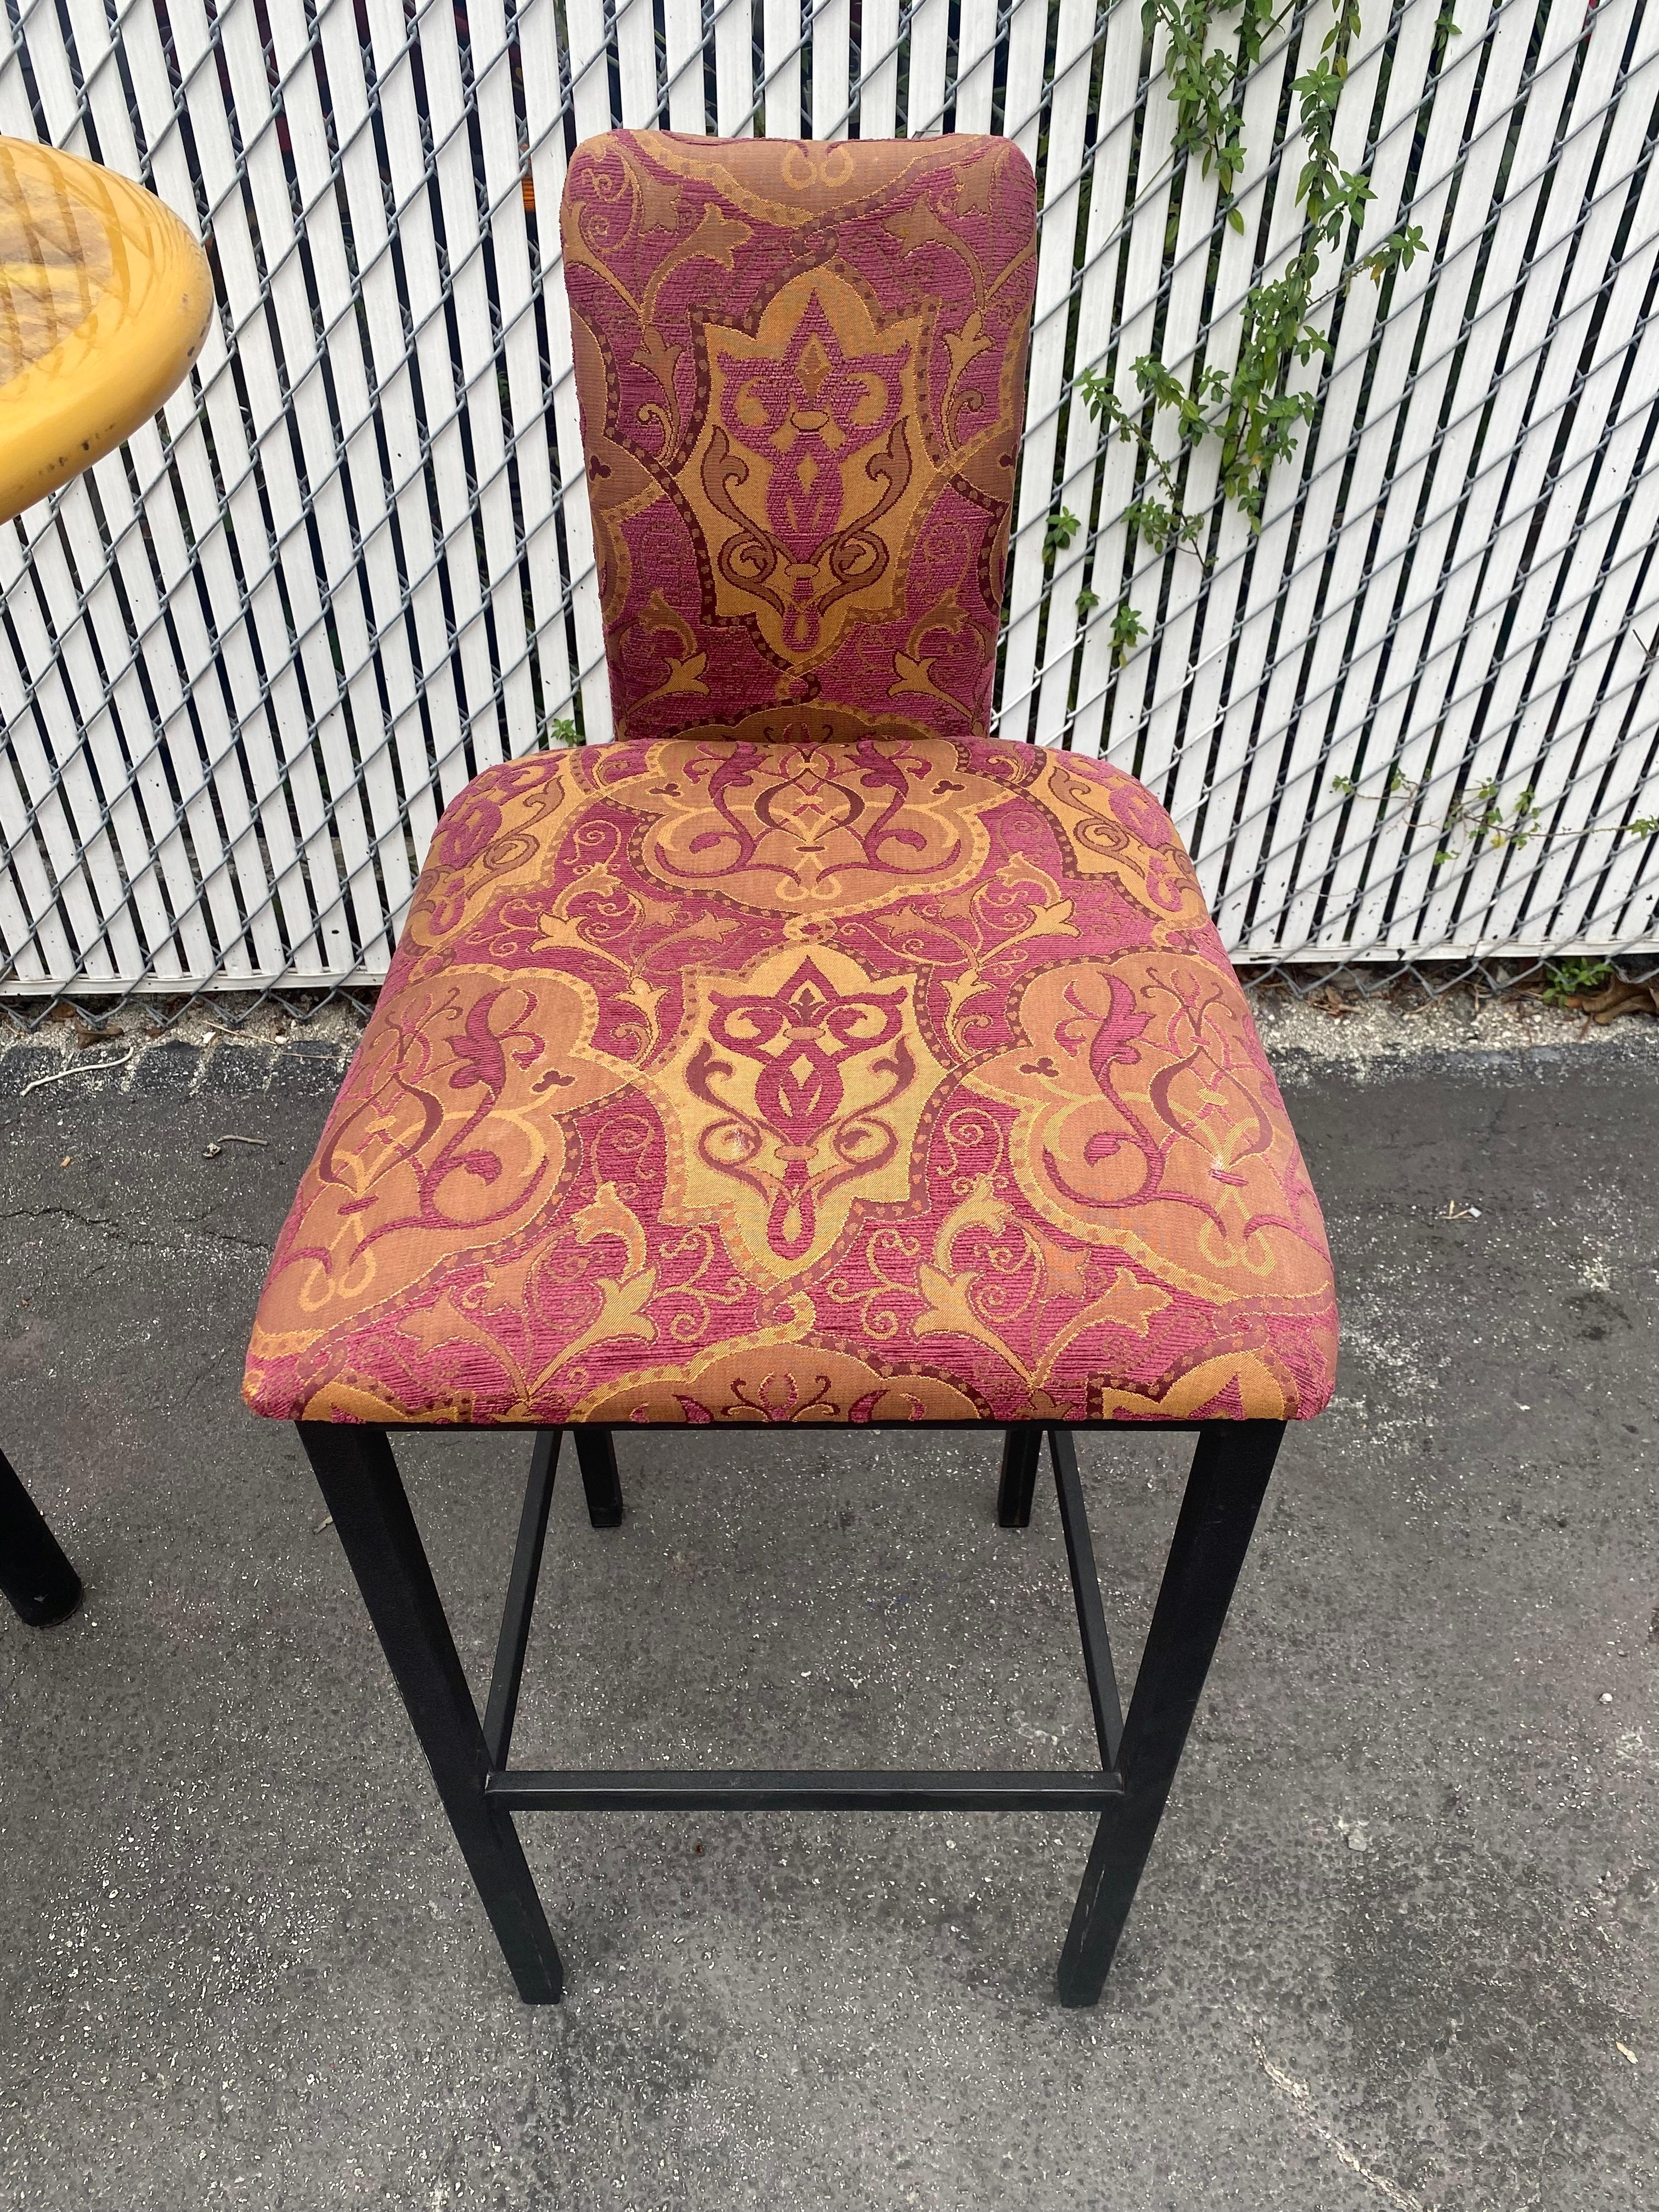 1980s Artistic Kidney Bar Pub Dining Table and Chairs, Set of 3 For Sale 6